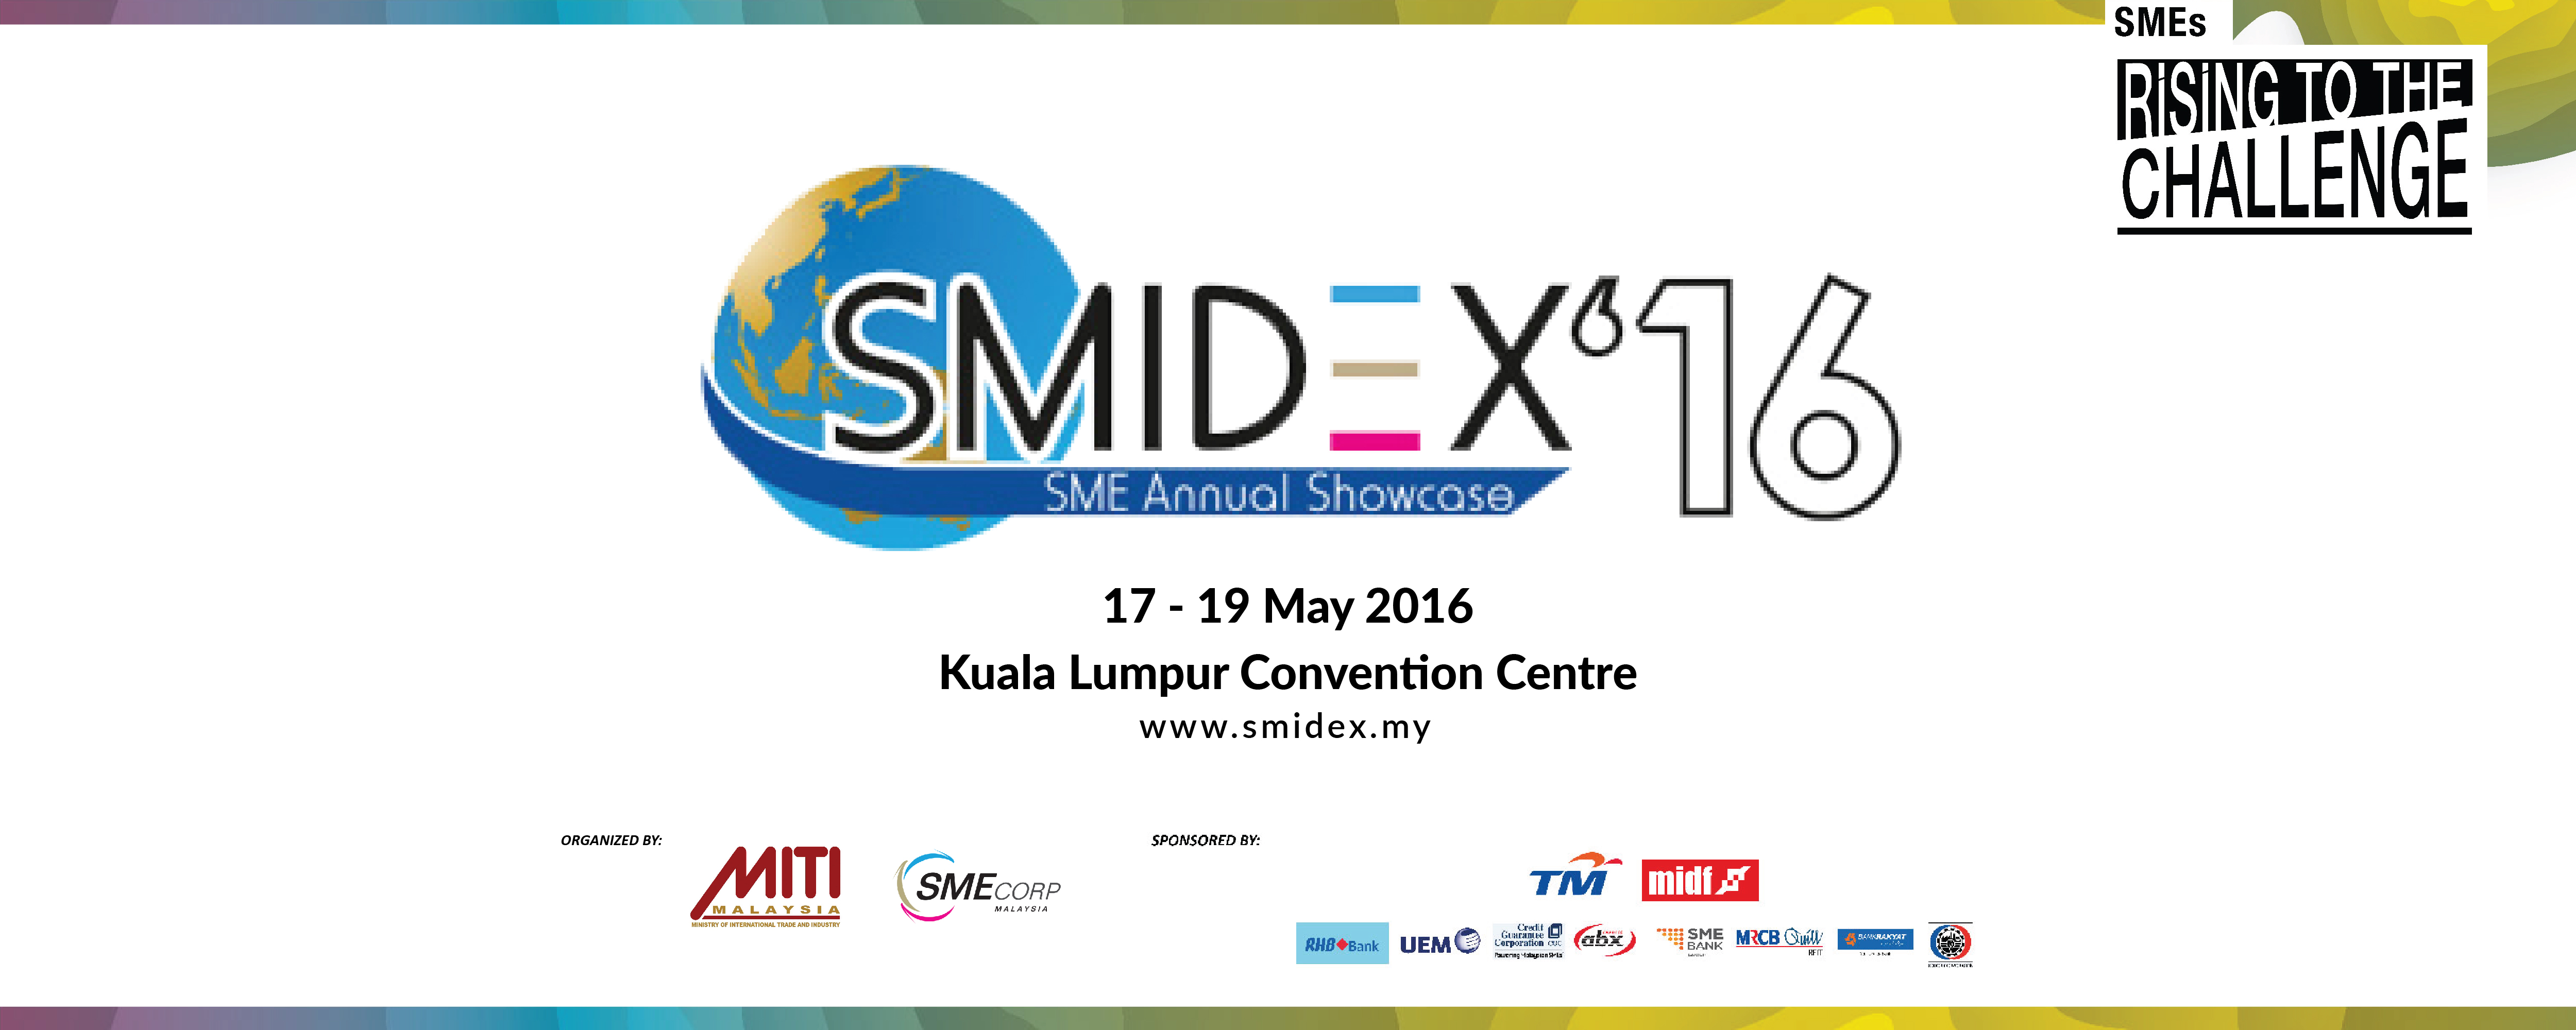 1 - Cover for Smidex 2016